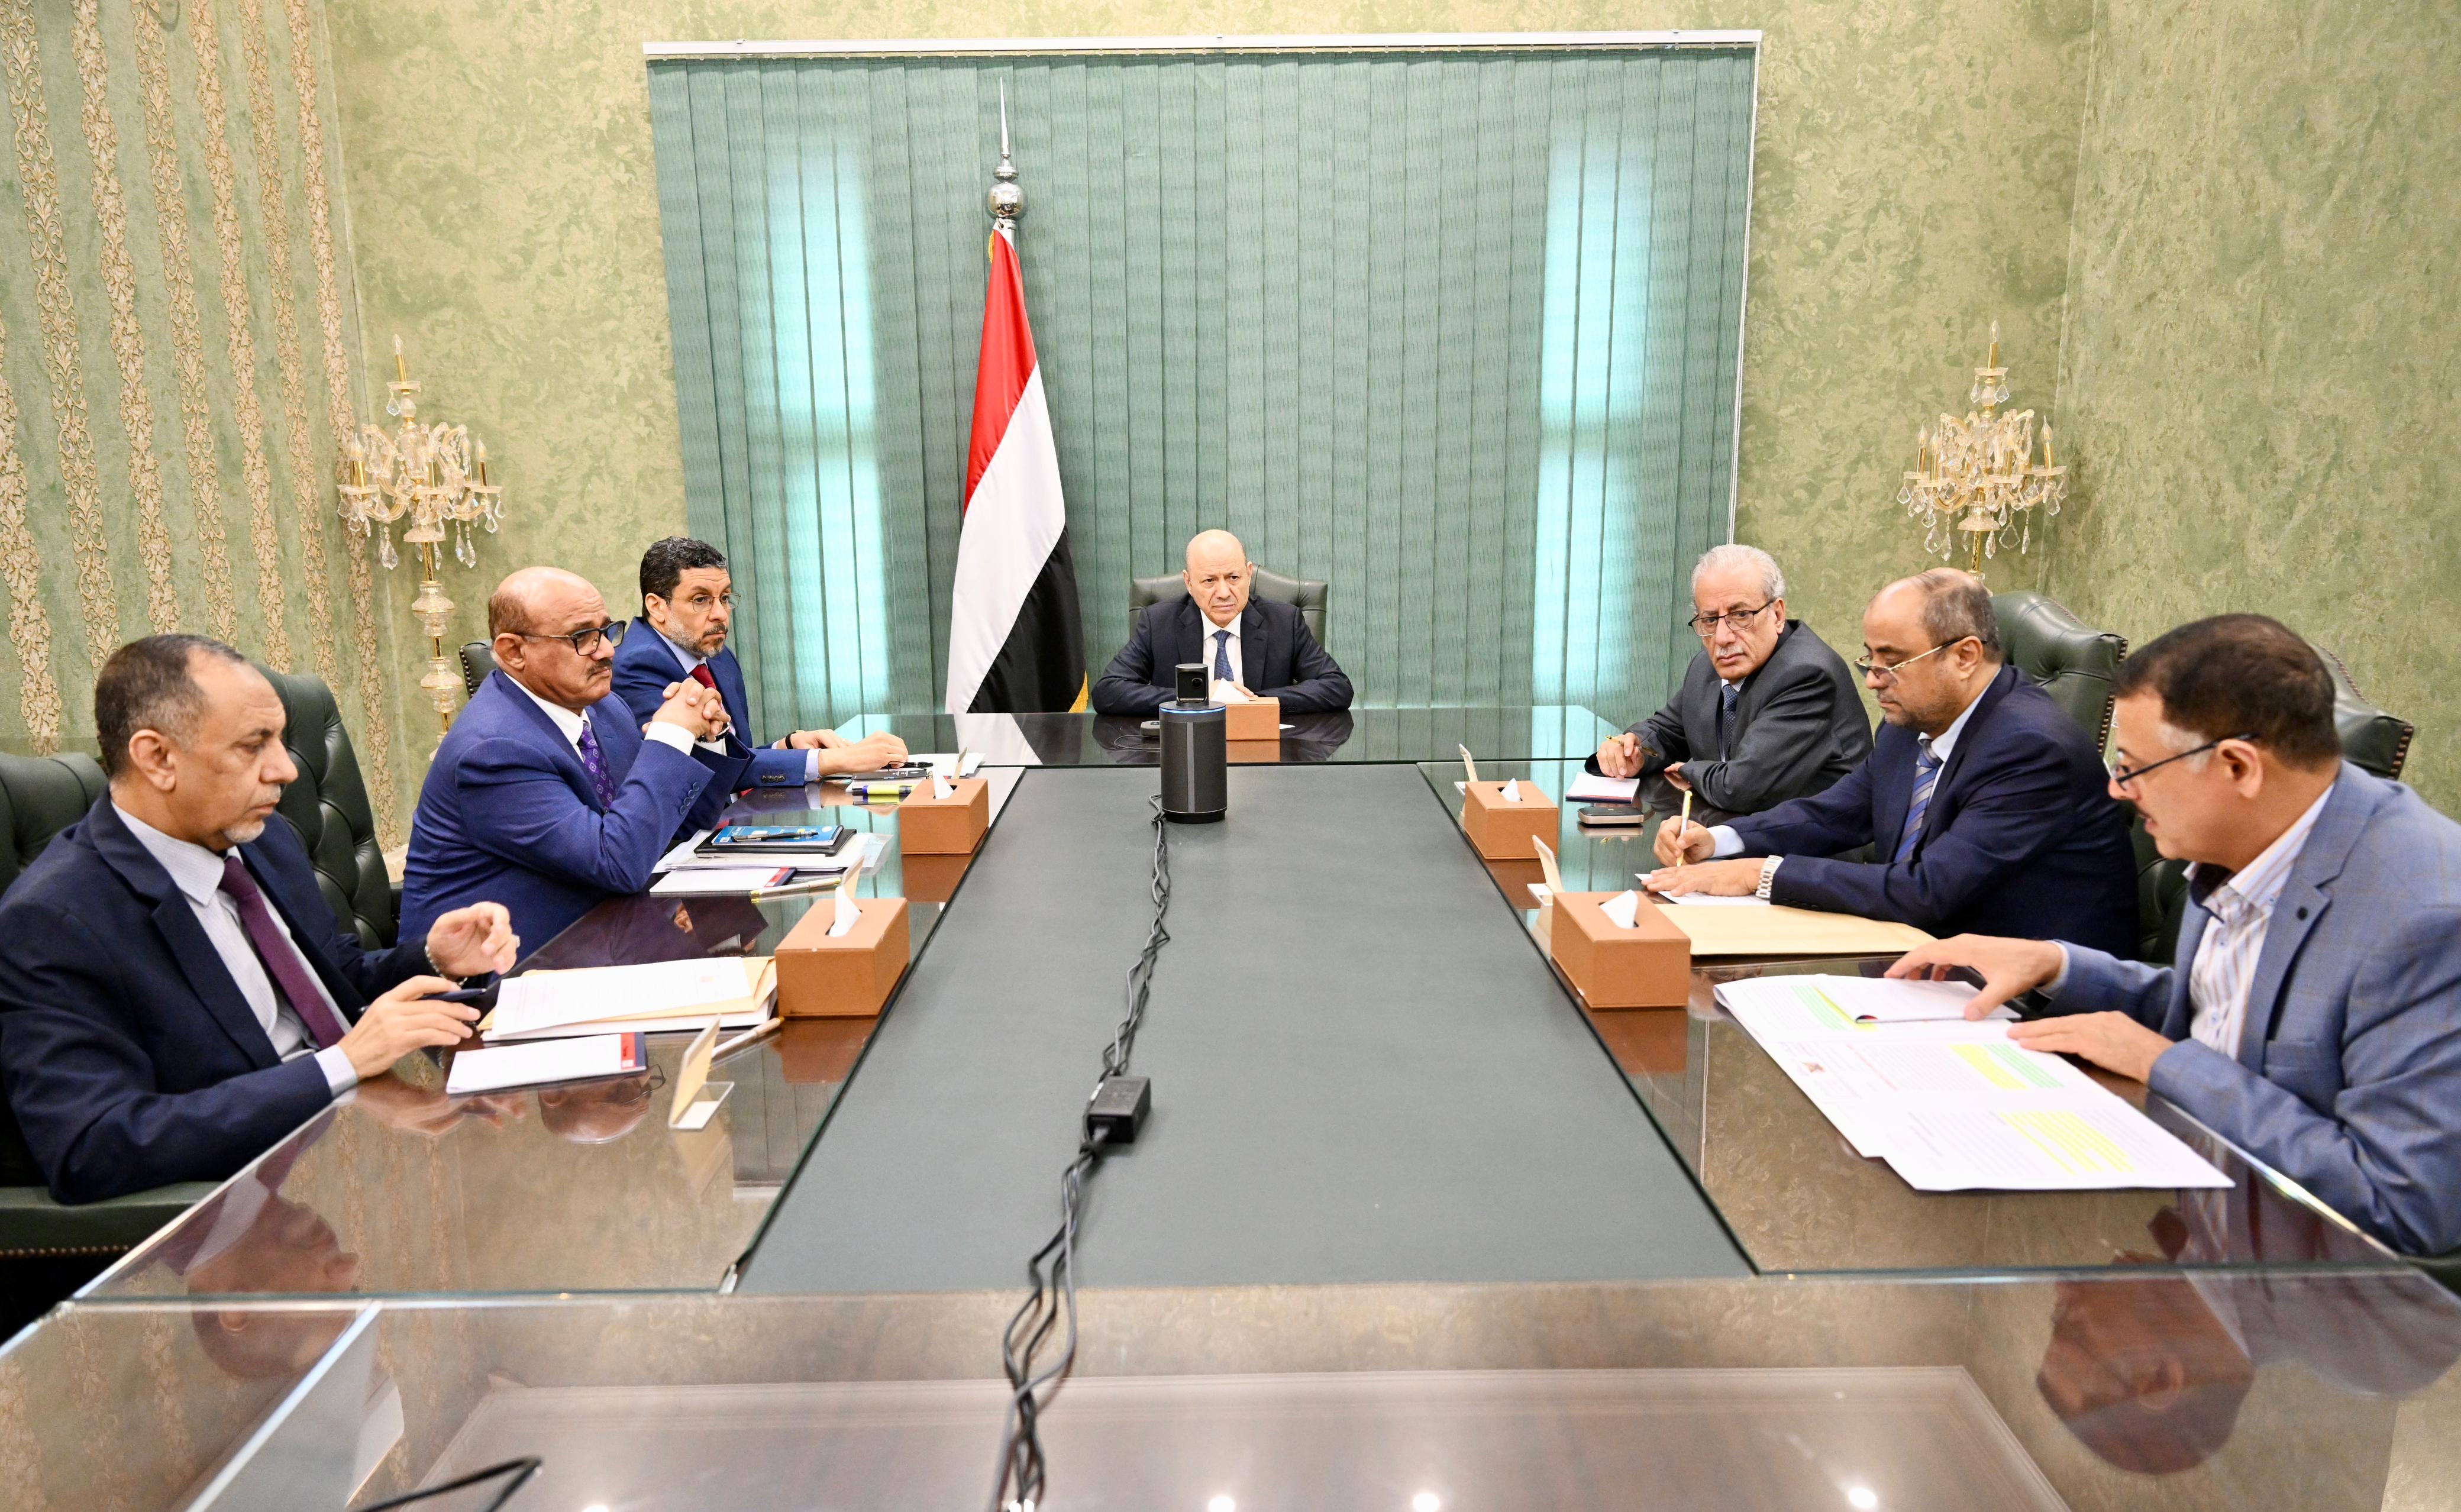 PRESIDENT AL-ALIMI MEETS WITH PRIME MINISTER, GOVERNOR OF THE CENTRAL BANK, AND MINISTERS AND OFFICIALS CONCERNED WITH ECONOMIC AFFAIRS